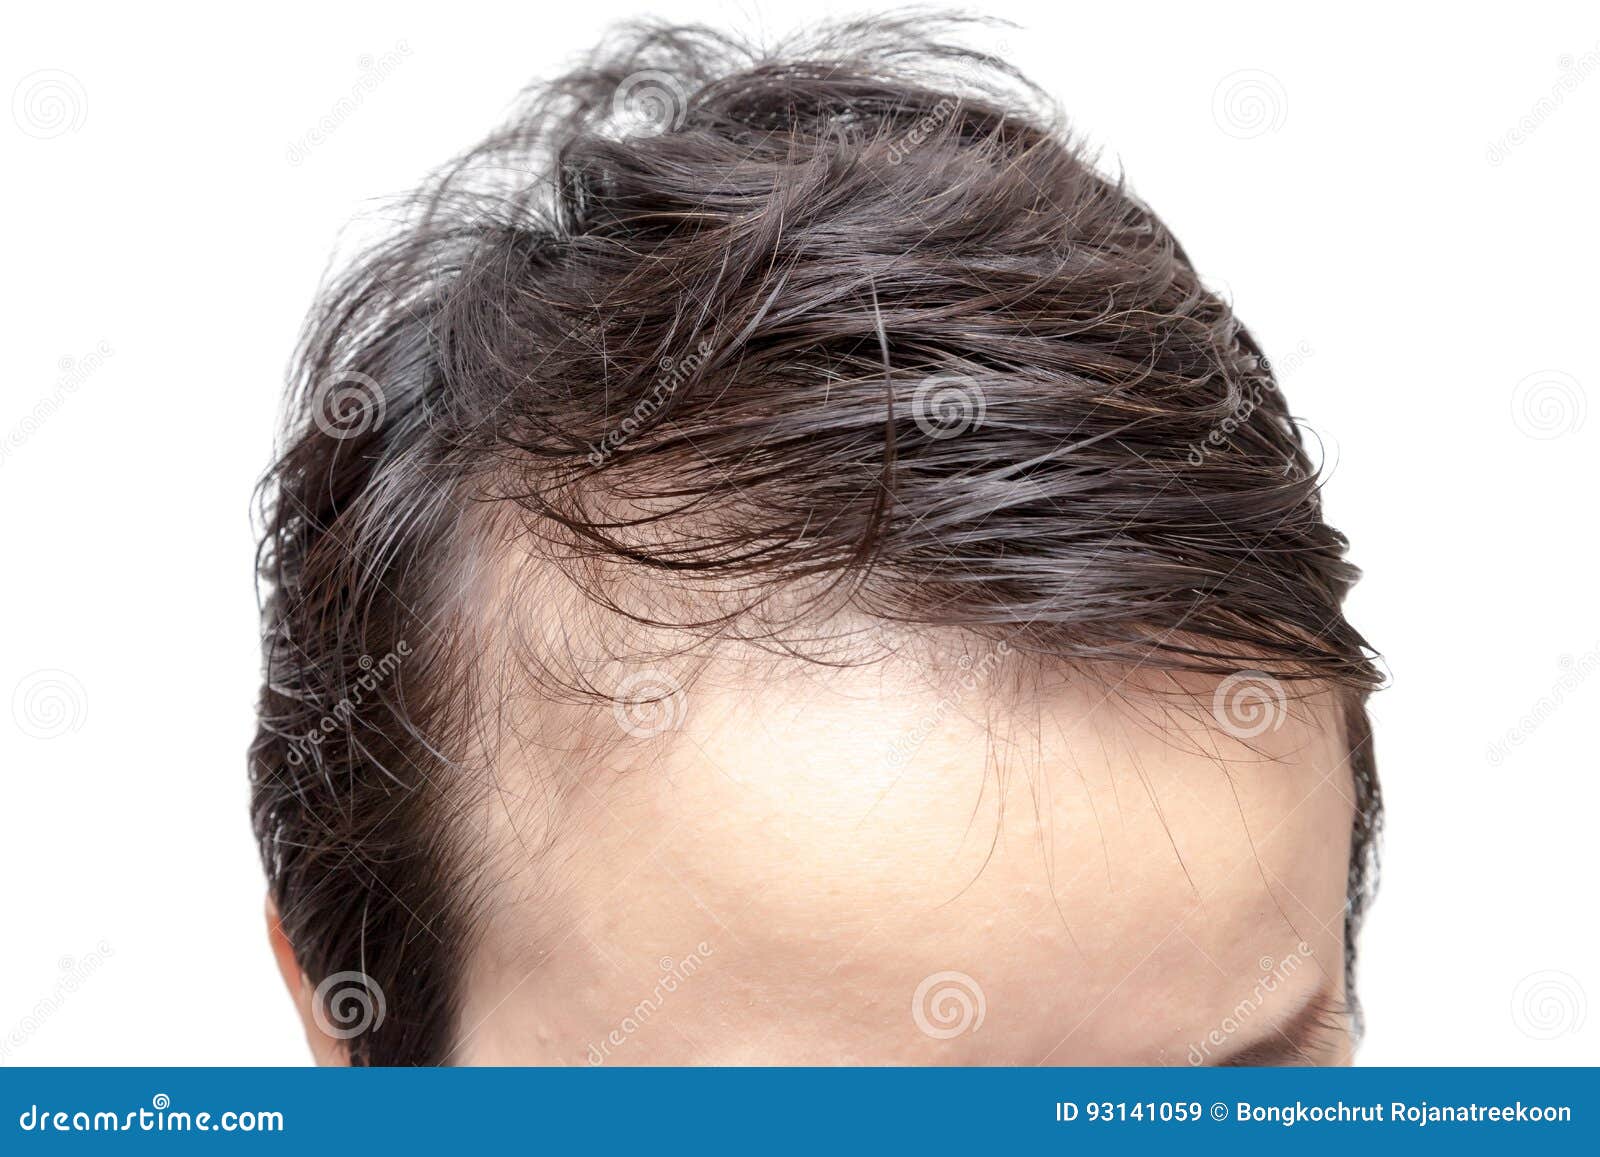 bald man or woman worry about his or her less hairline